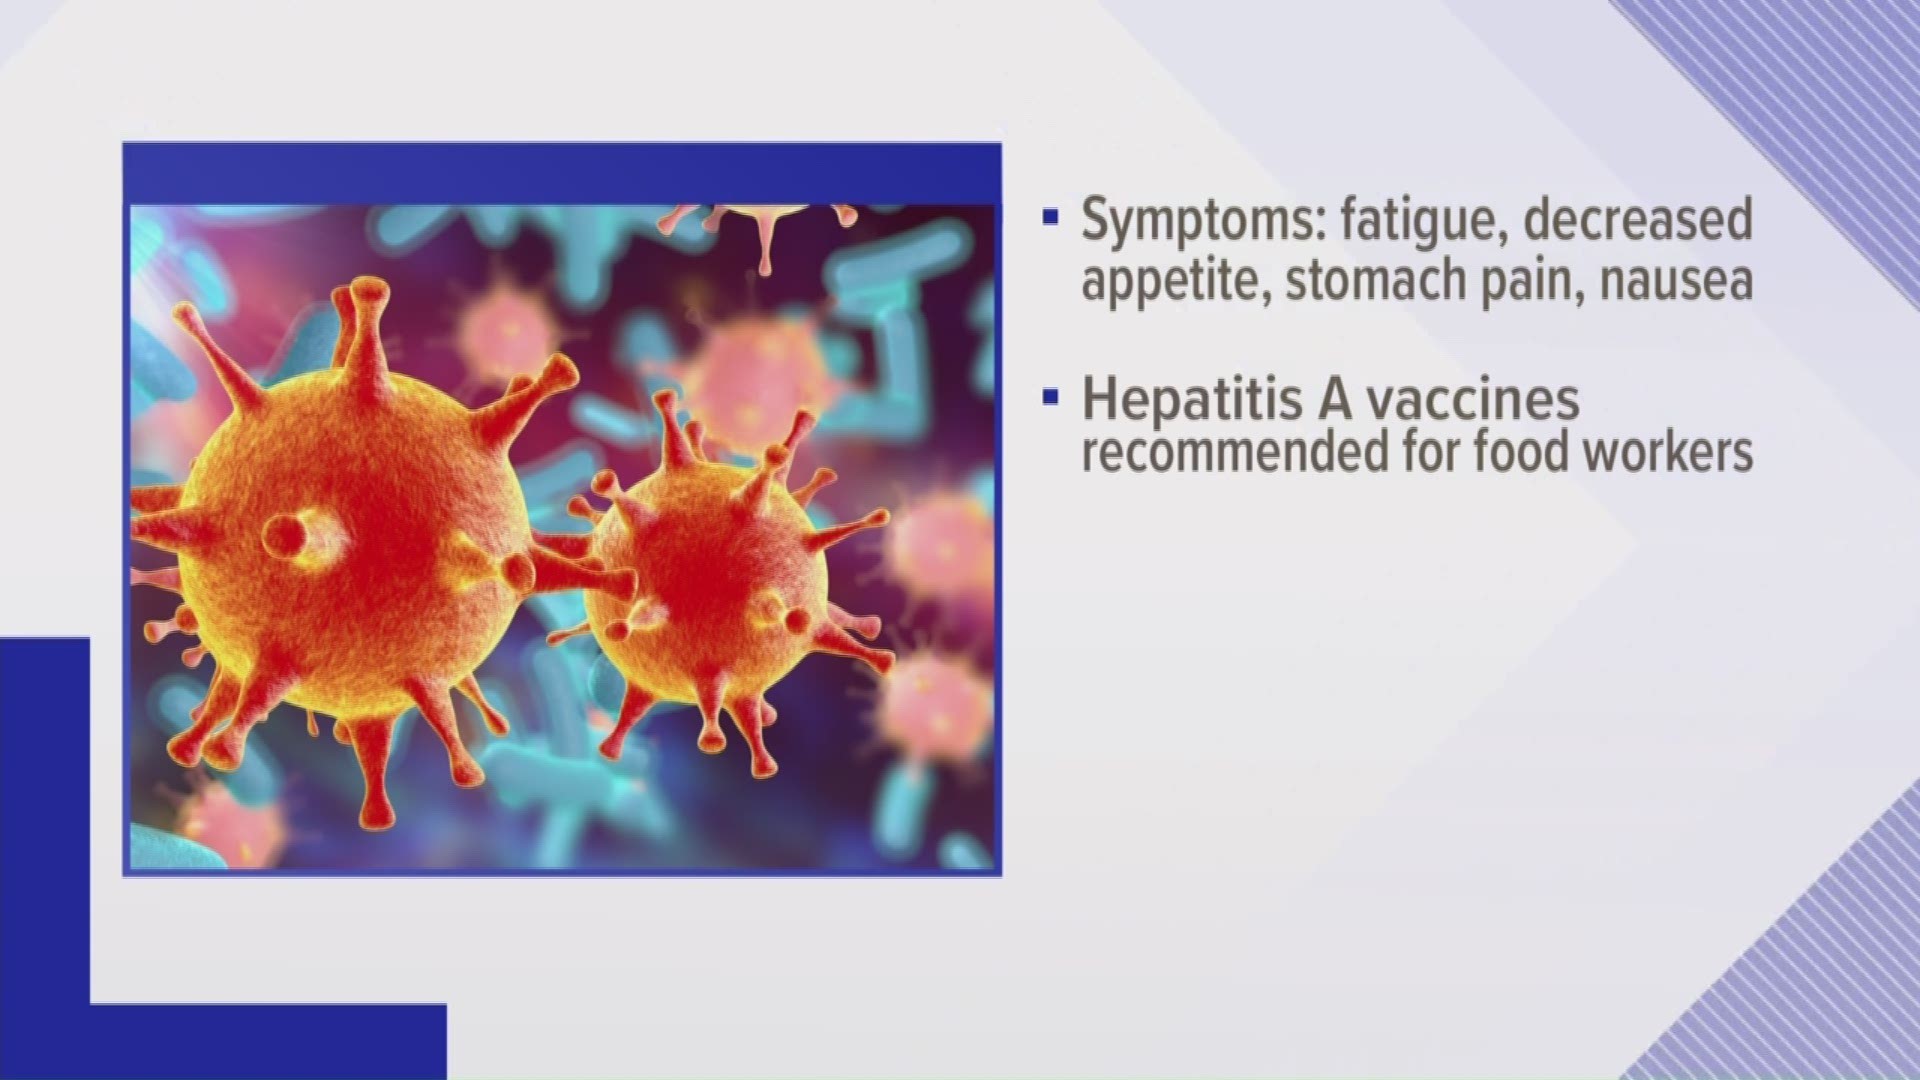 Hepatitis A is usually transmitted by putting something in your mouth such as an object, food or drink, which has been in contact with the feces of an infected person.